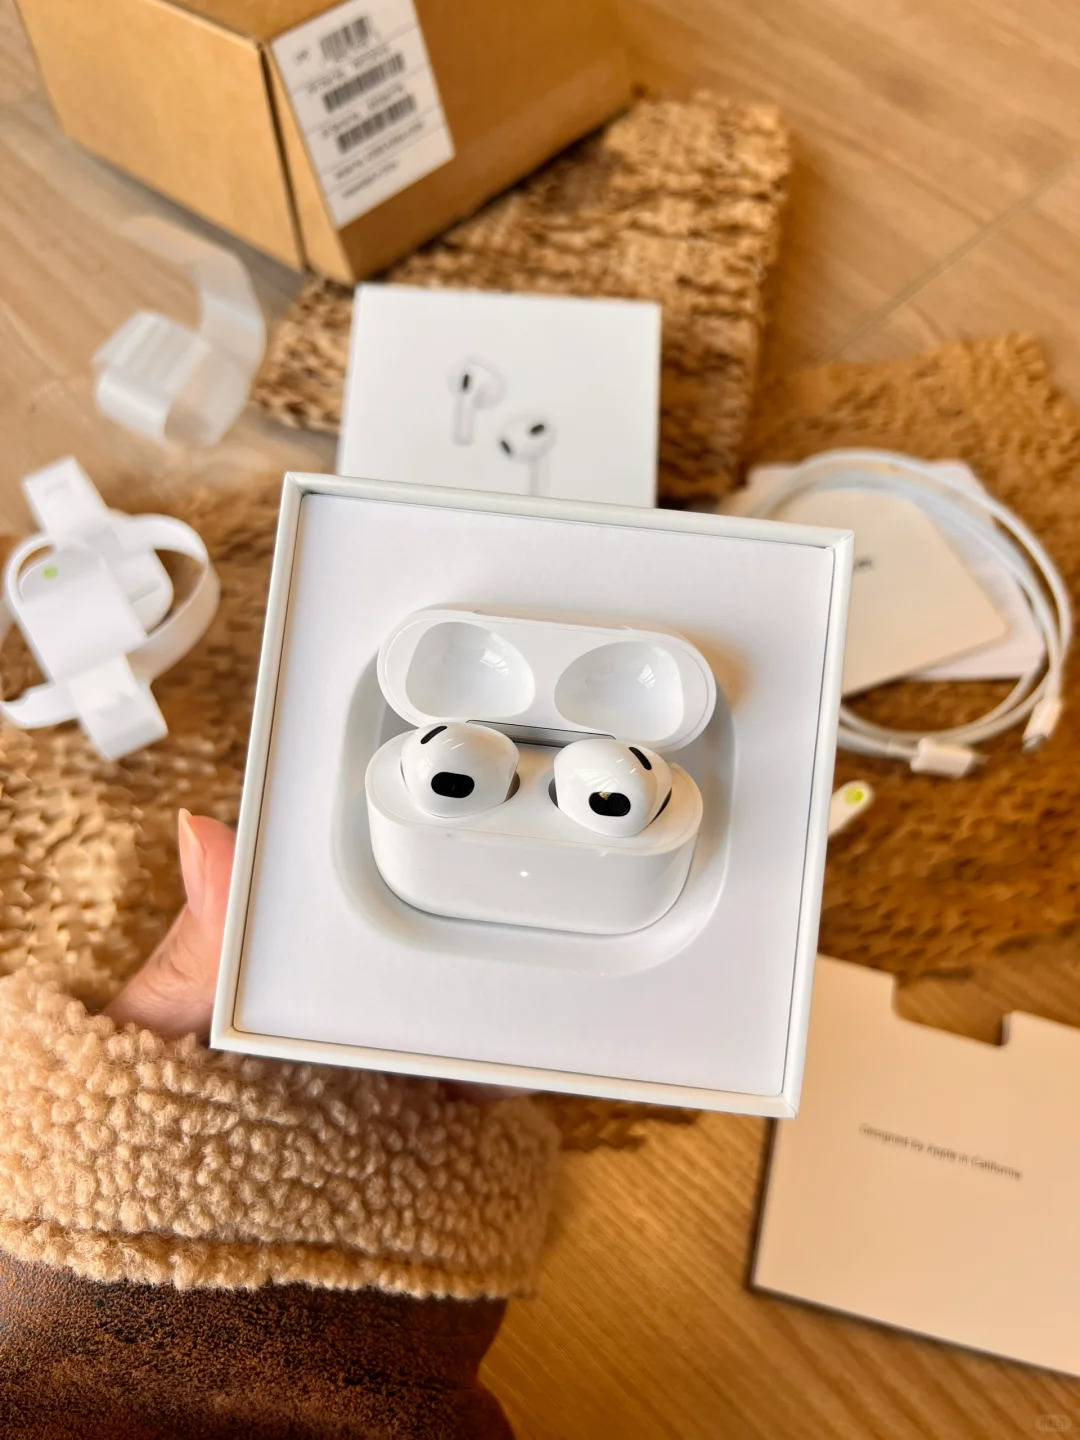 Apple AirPods 3rd Generation Bluetooth Earbuds Earphone Headset & Charging Case